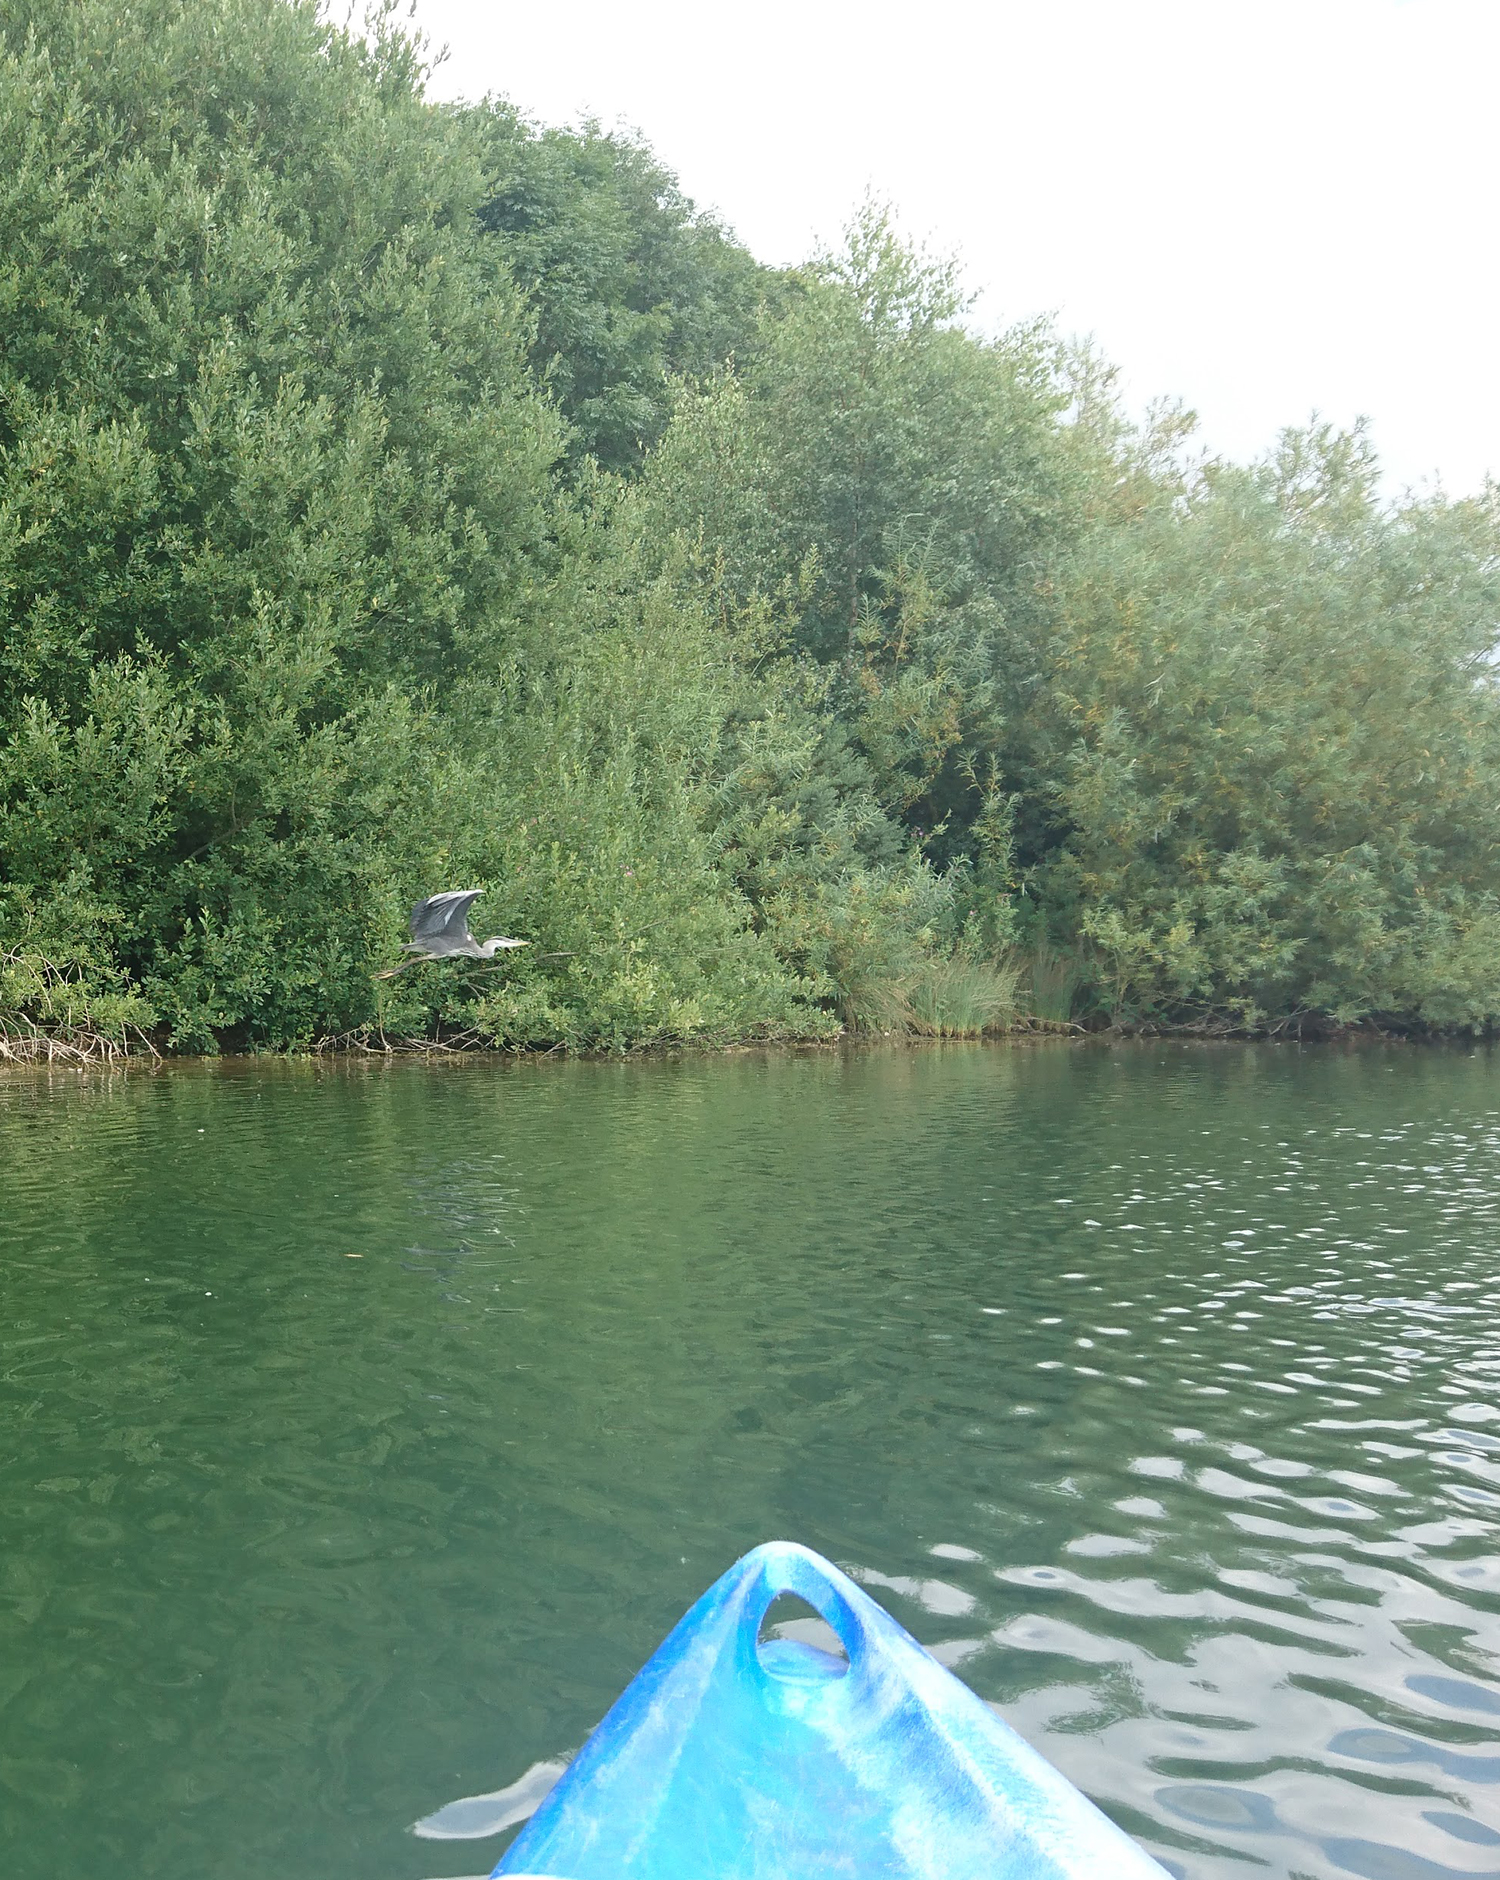 A Heron taking off in front of my Kayak